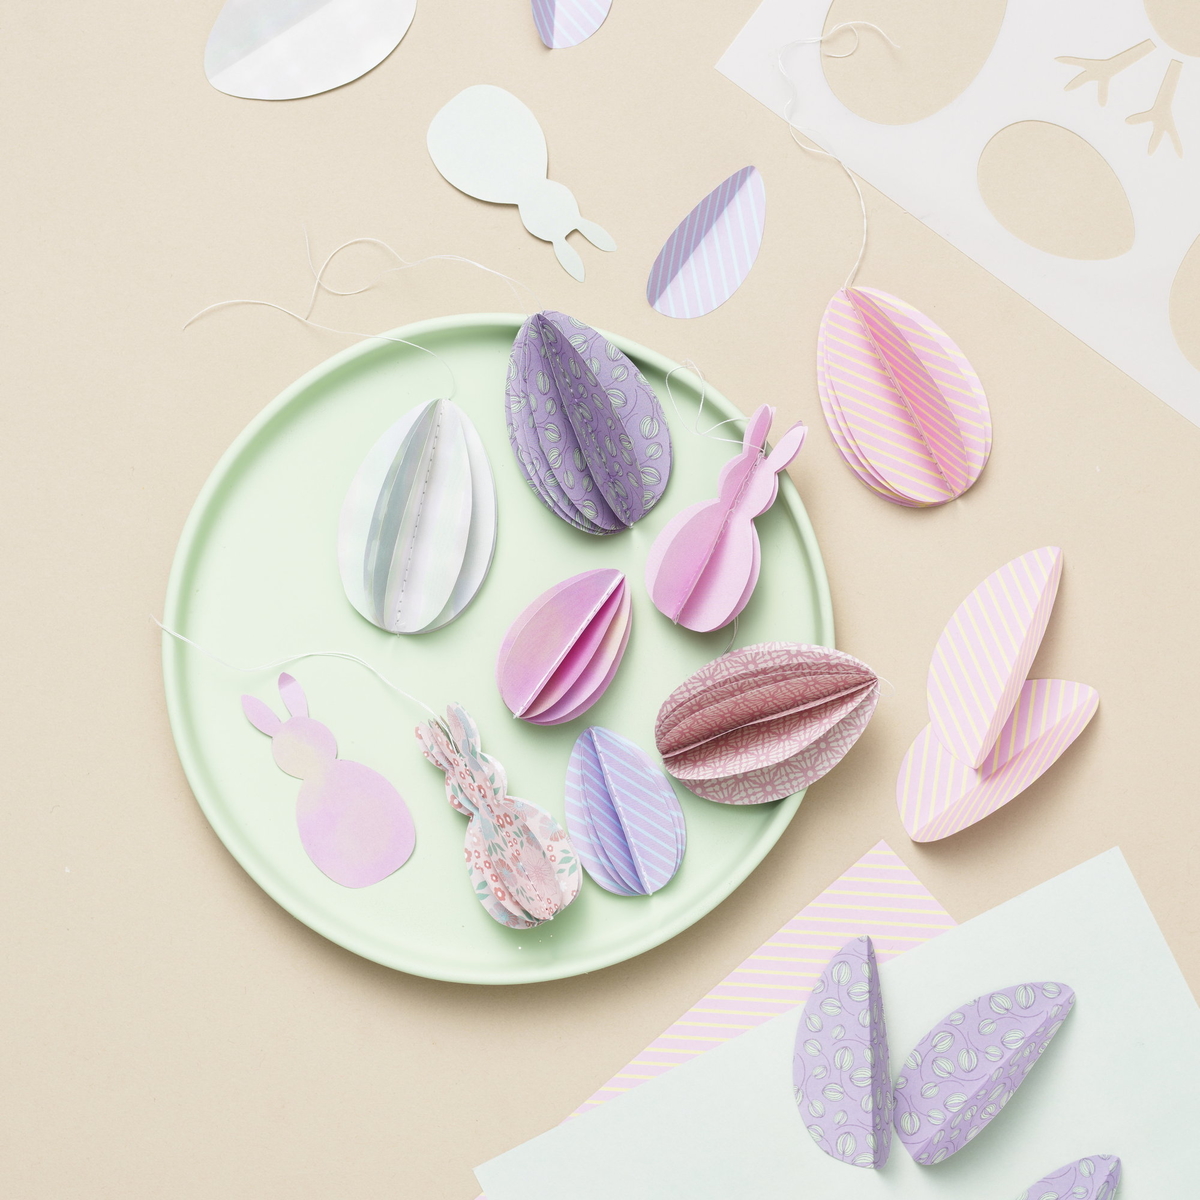 Cut out adorable paper Easter ornaments